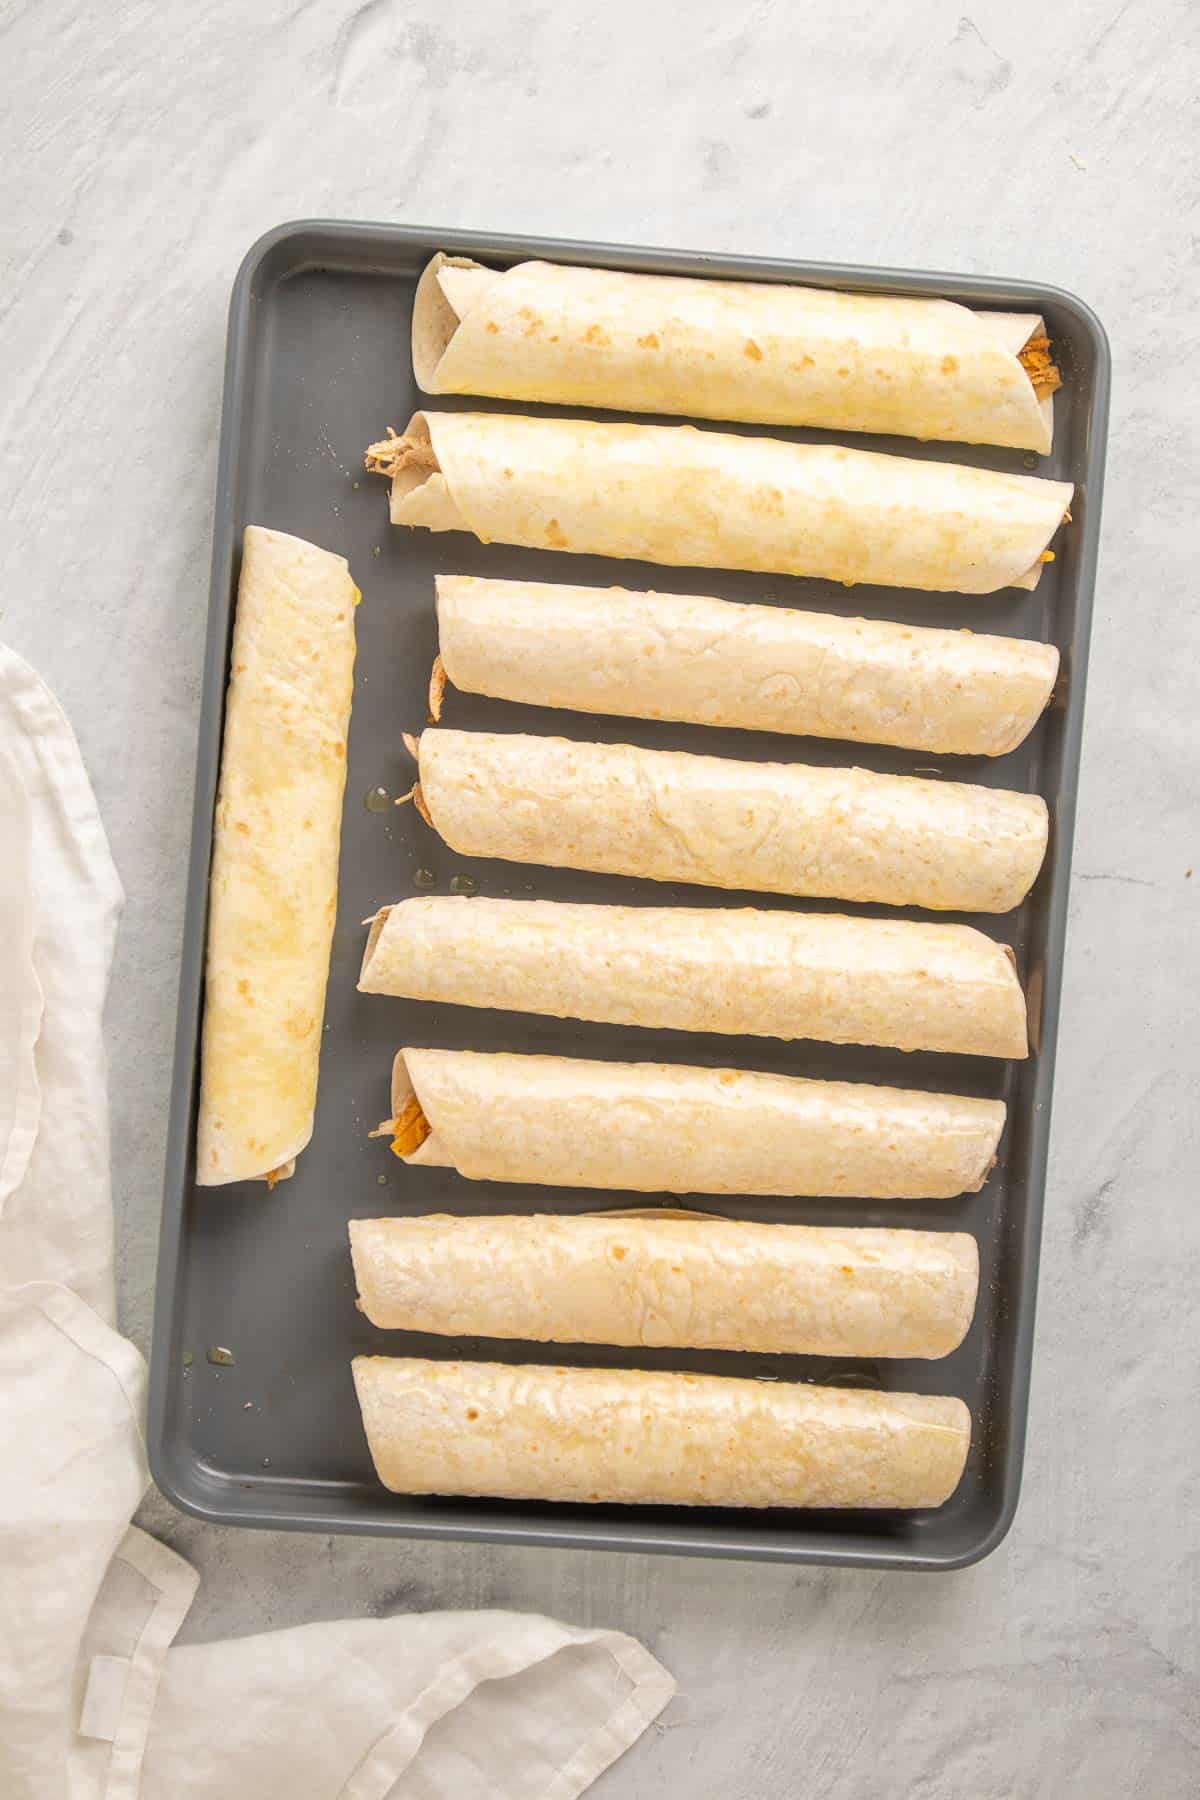 Nine taquitos rolled and placed on a baking tray, ready to go in the oven